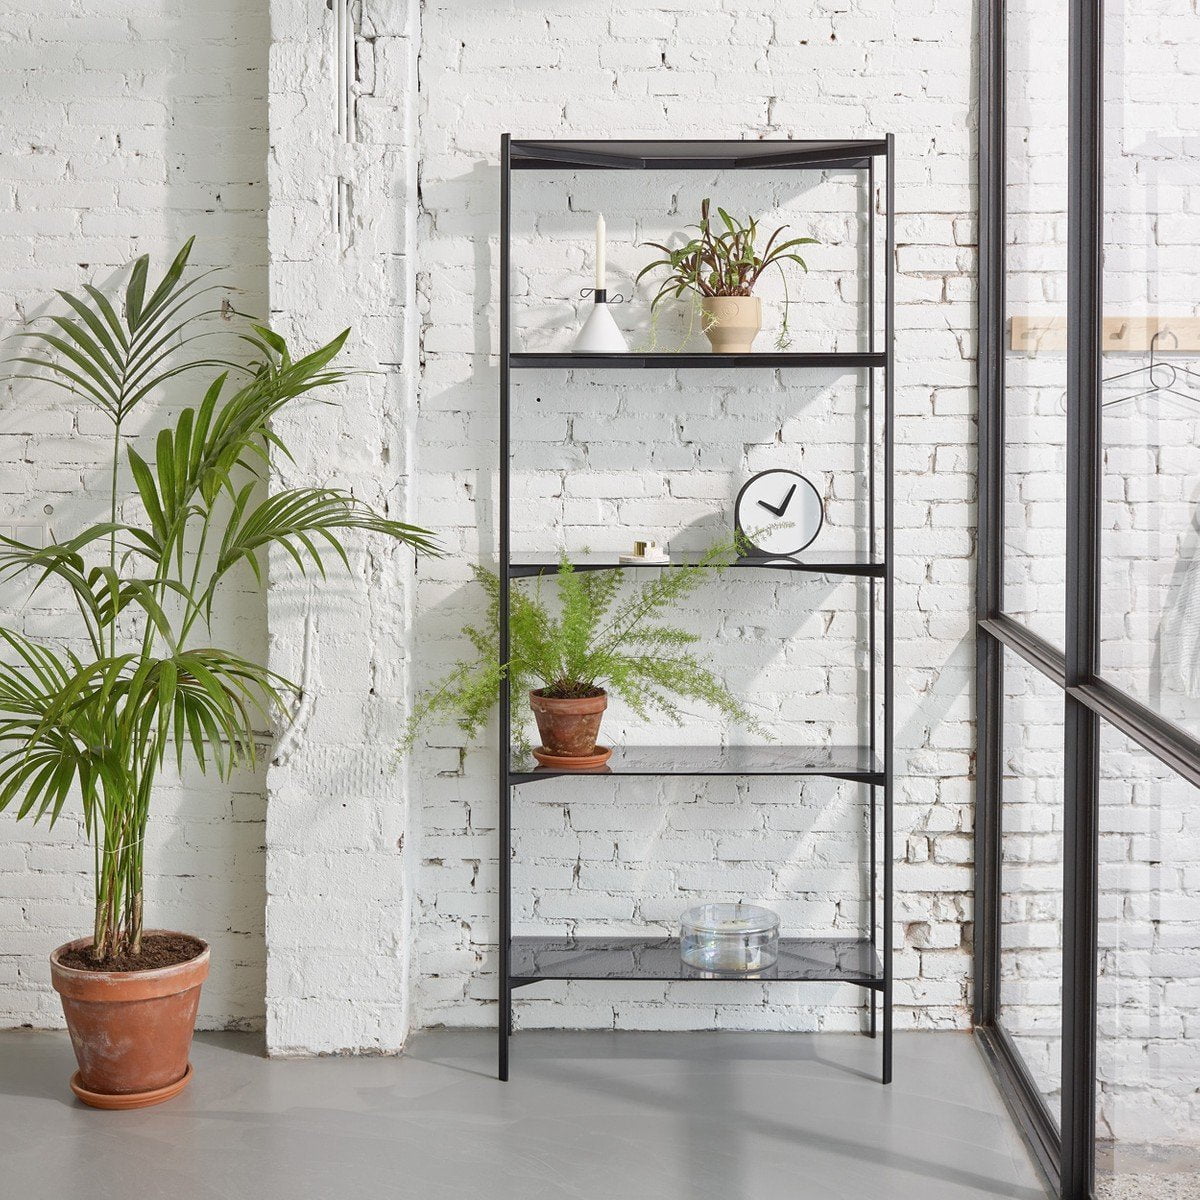 A black shelf with a potted plant in front of a white wall. The black shelf features an asymmetrical shape, complemented by the presence of a Puik Clork Table Clock.